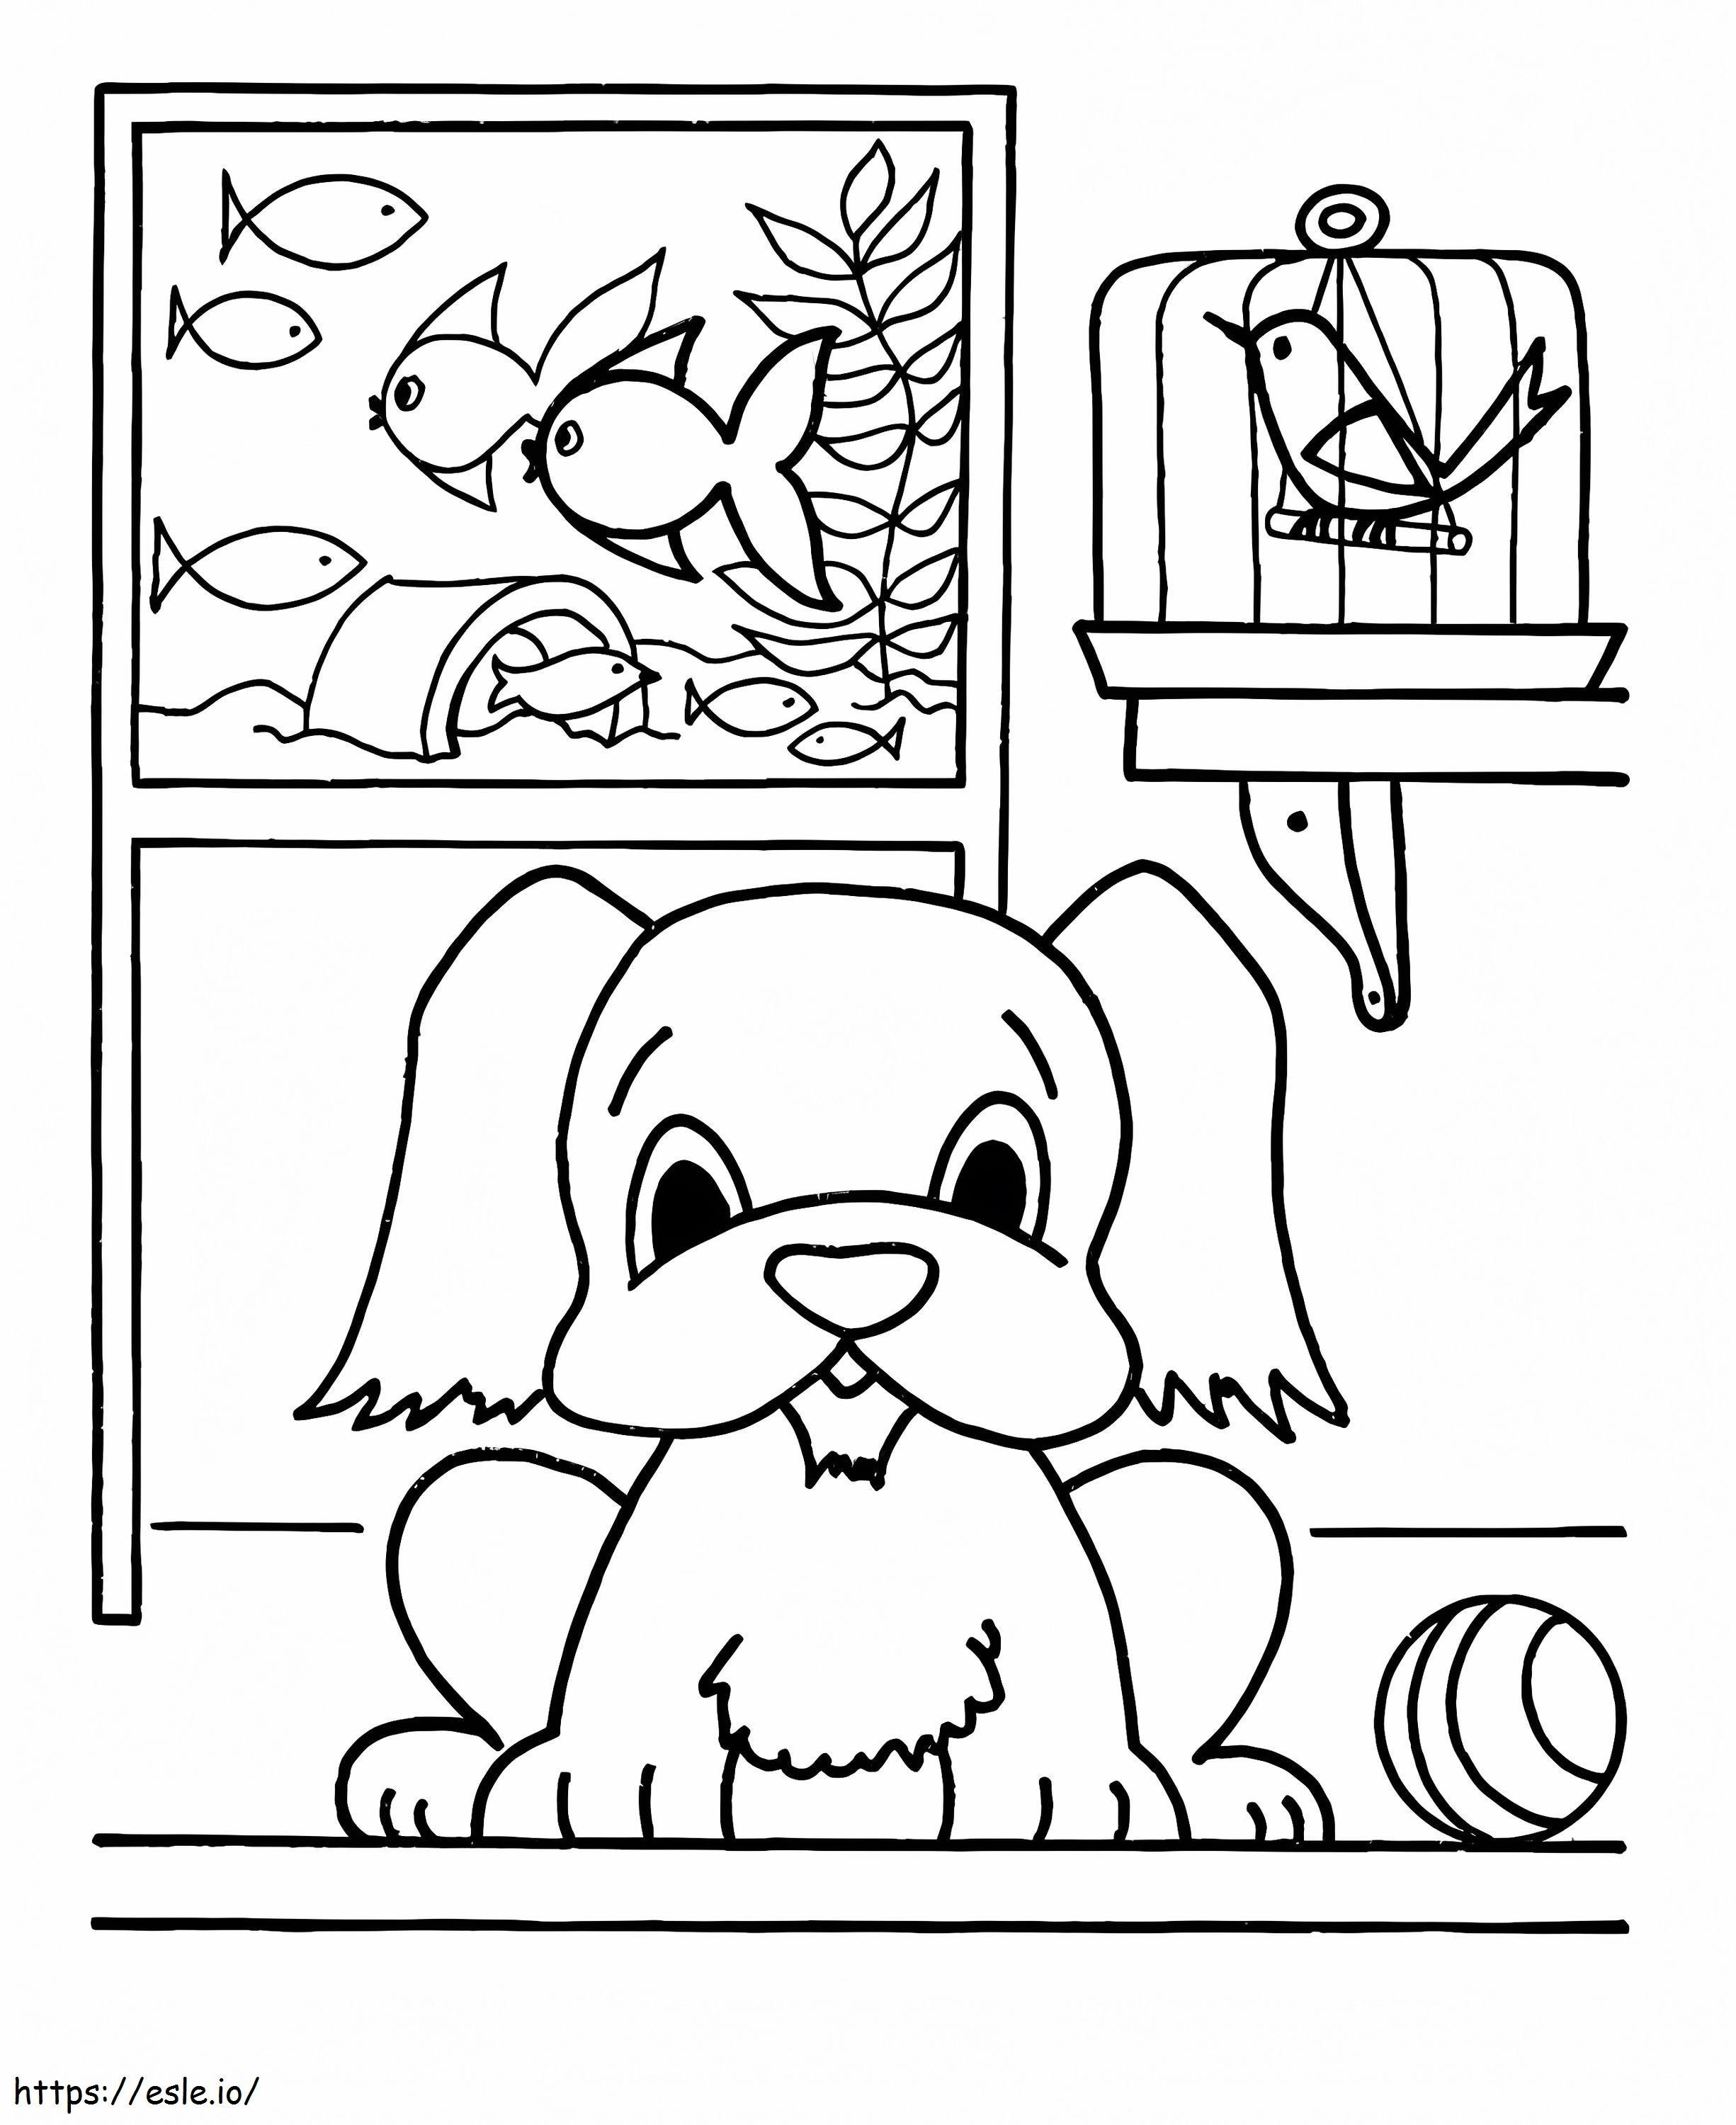 House Pets coloring page